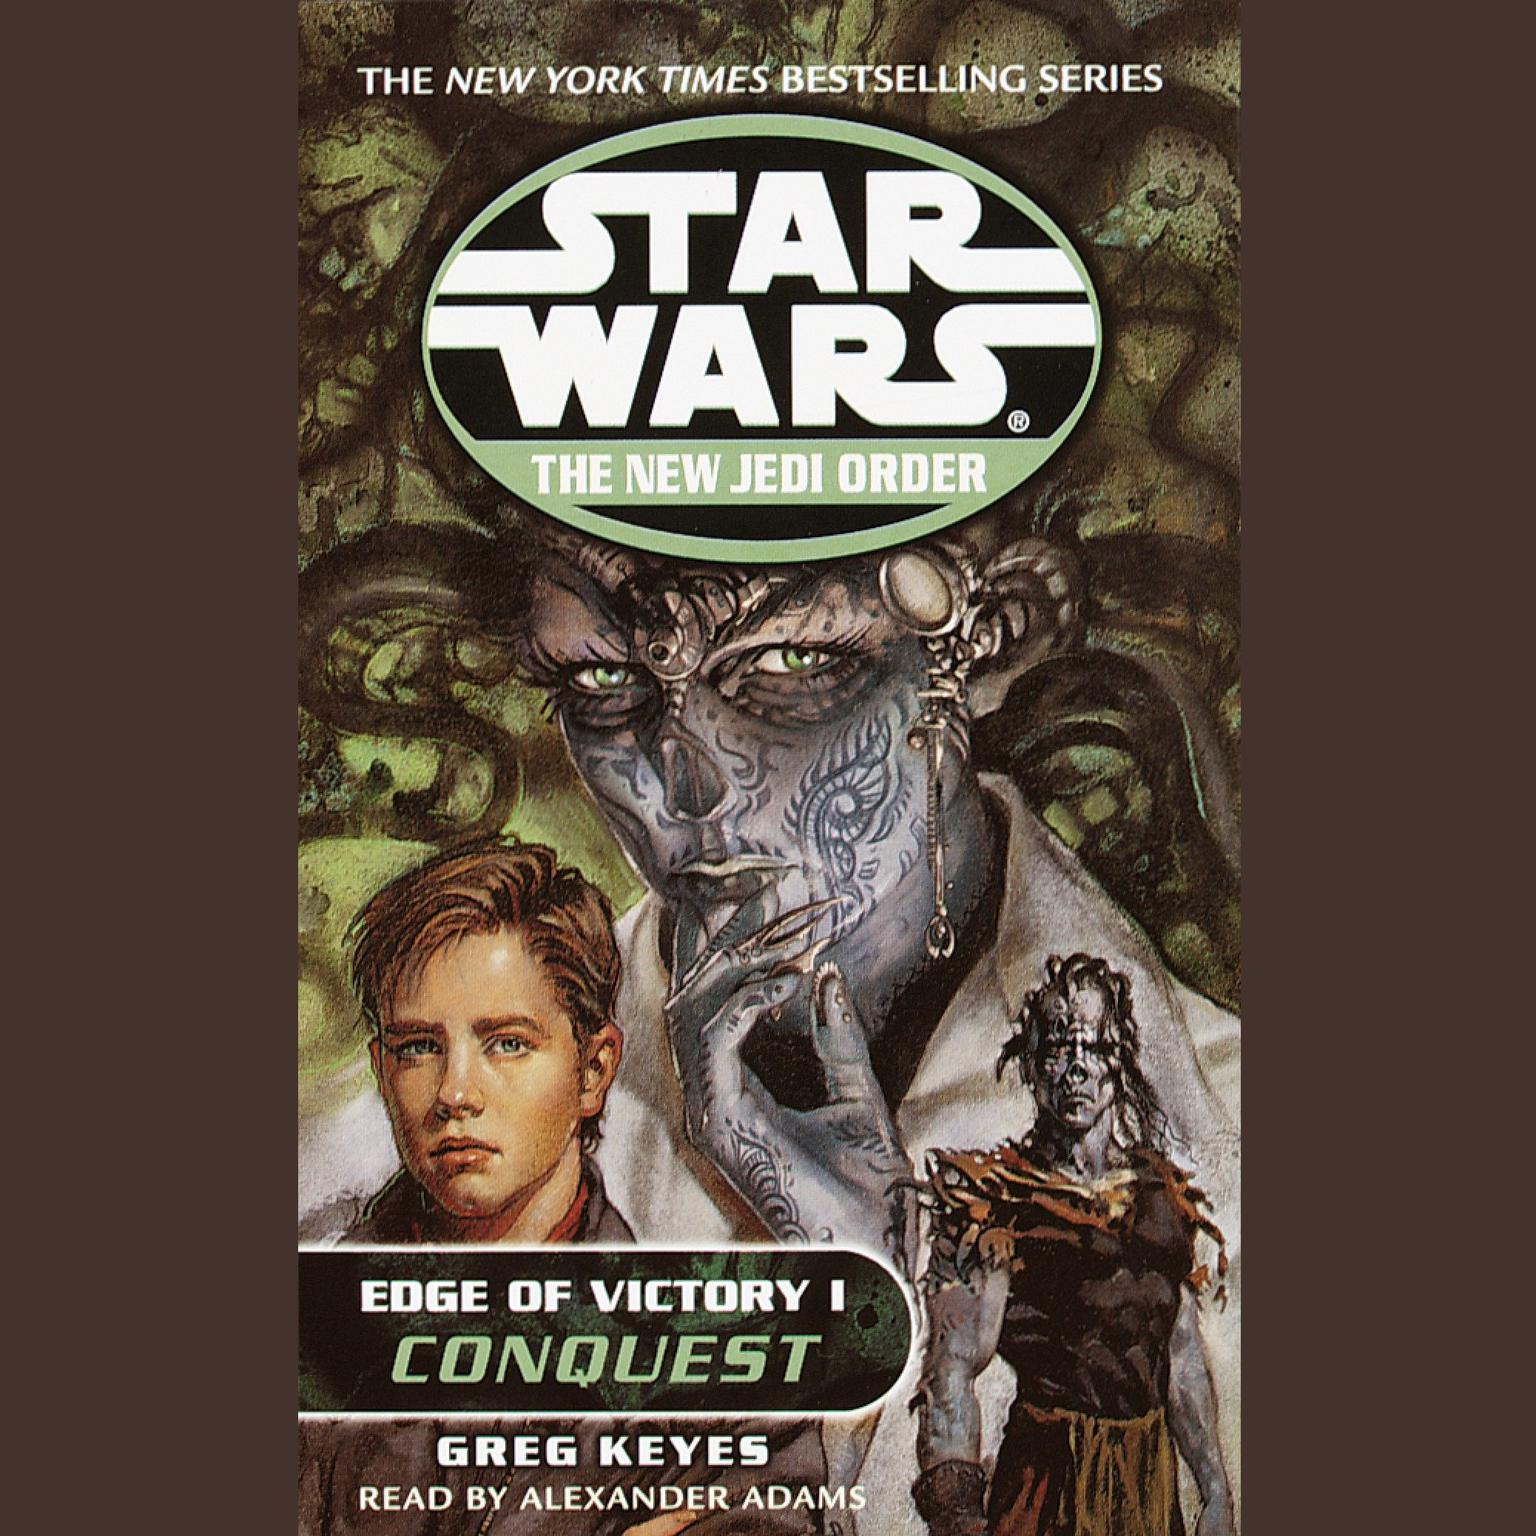 Star Wars: The New Jedi Order: Edge of Victory I: Conquest (Abridged) Audiobook, by Greg Keyes